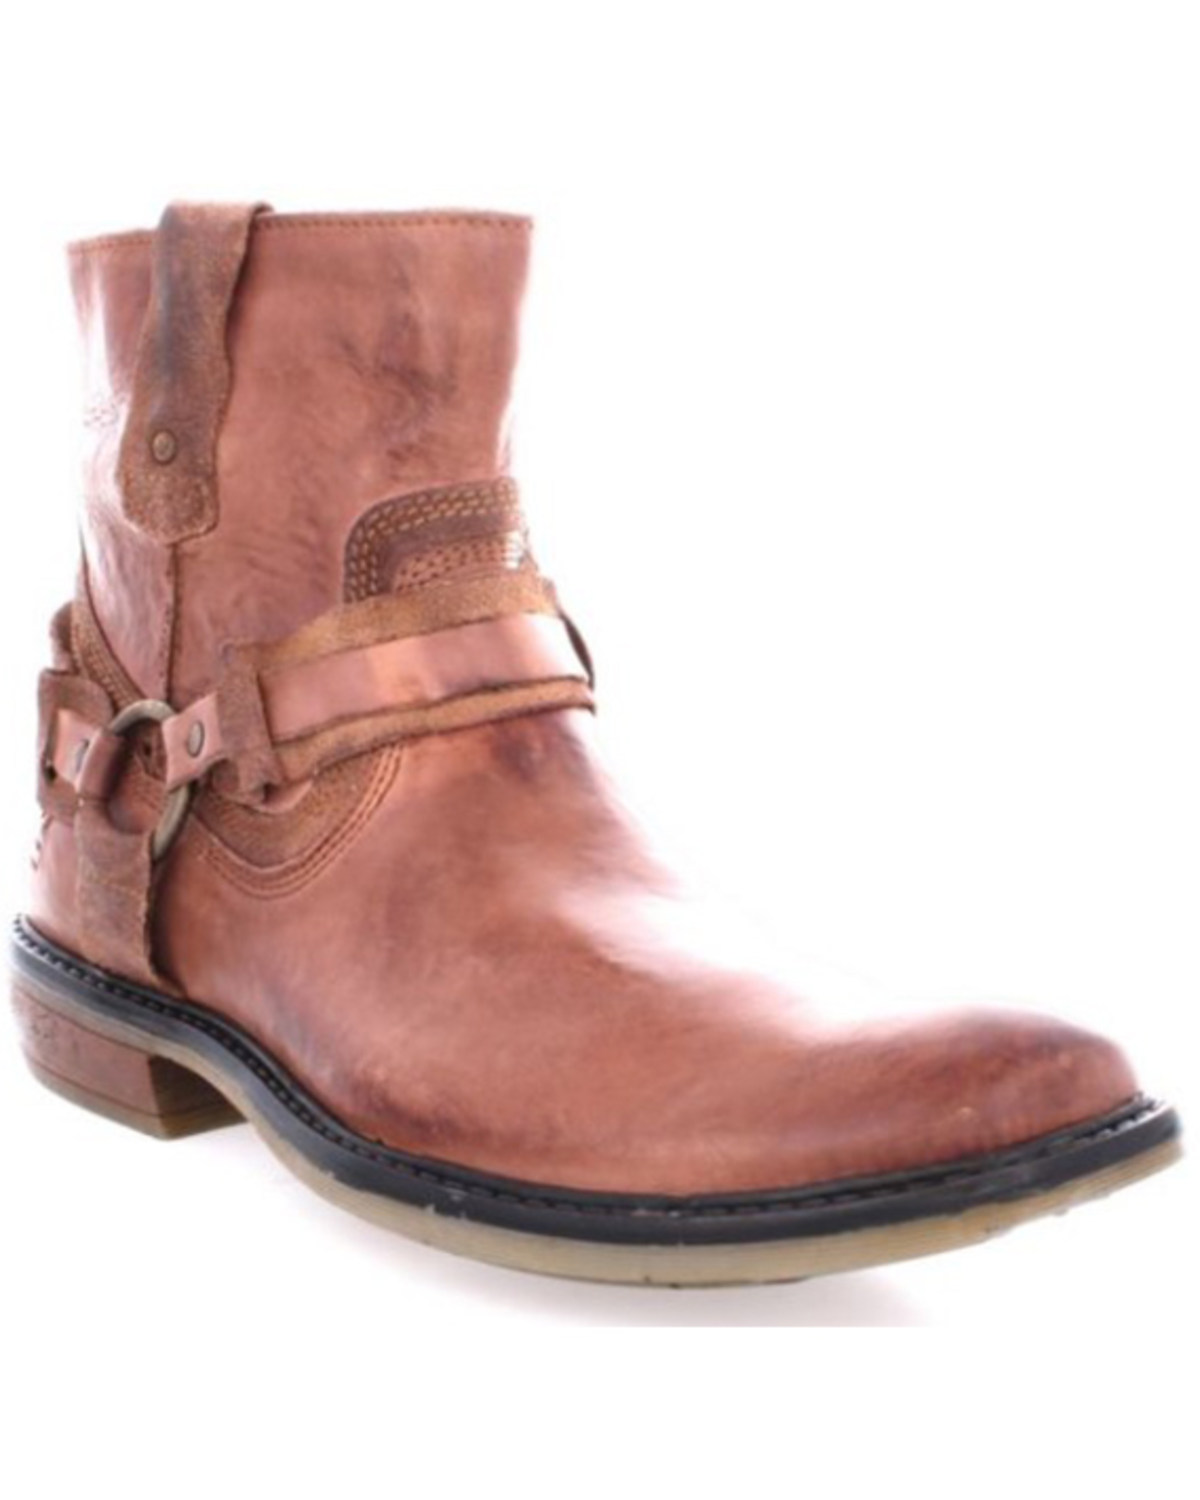 Roan by Bed Stu Men's Native II Western Casual Boots - Square Toe